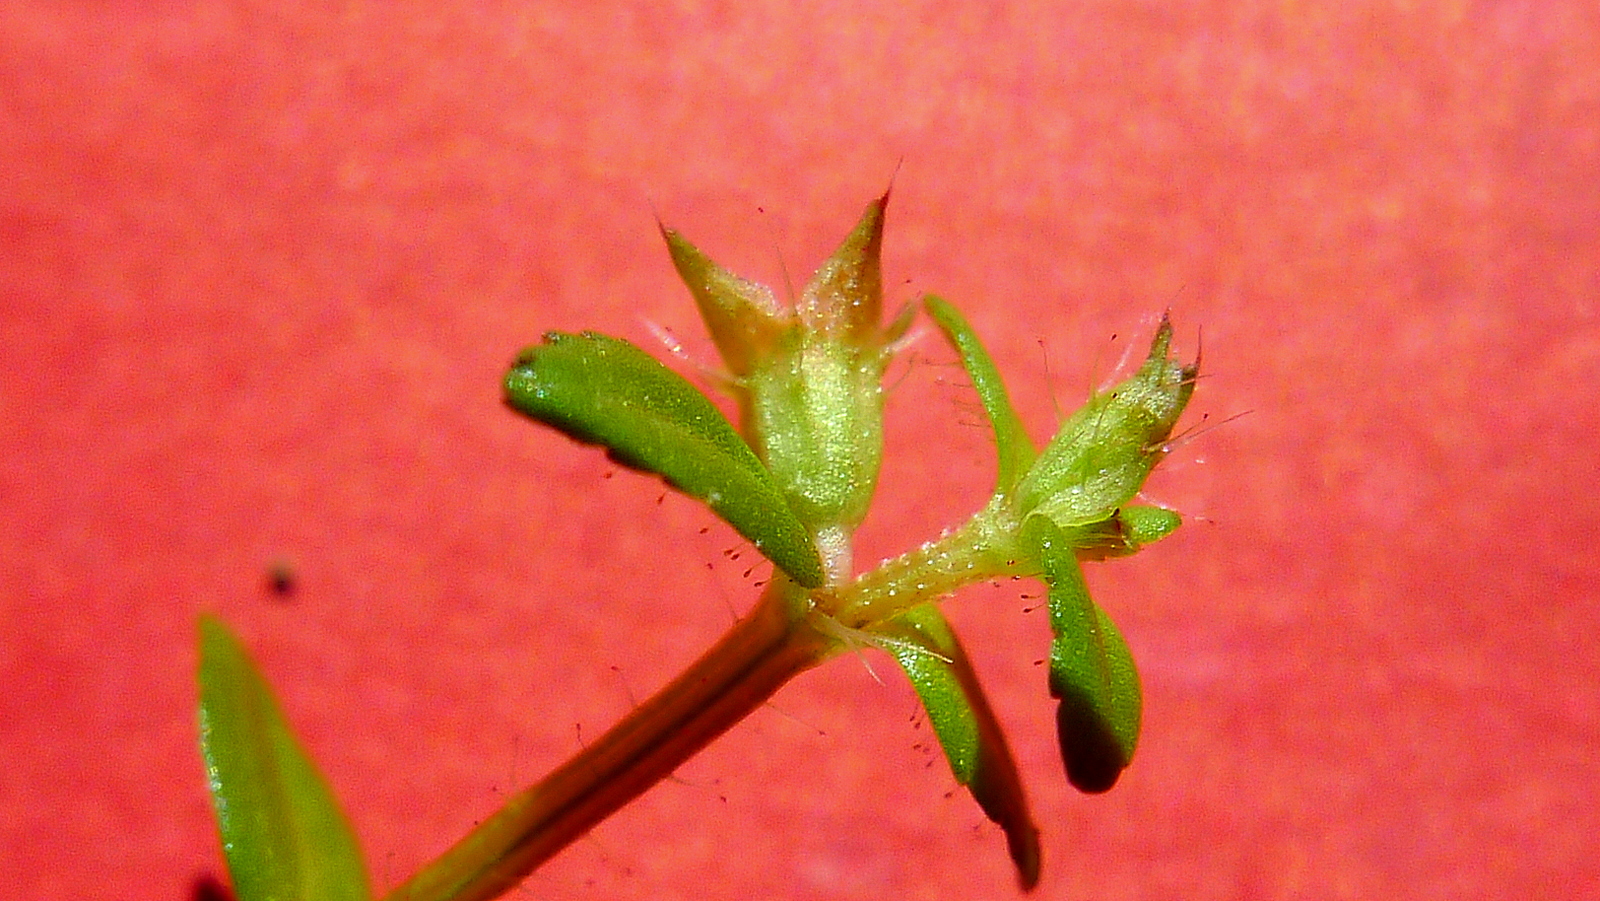 a very small green plant sprout growing on a pink surface